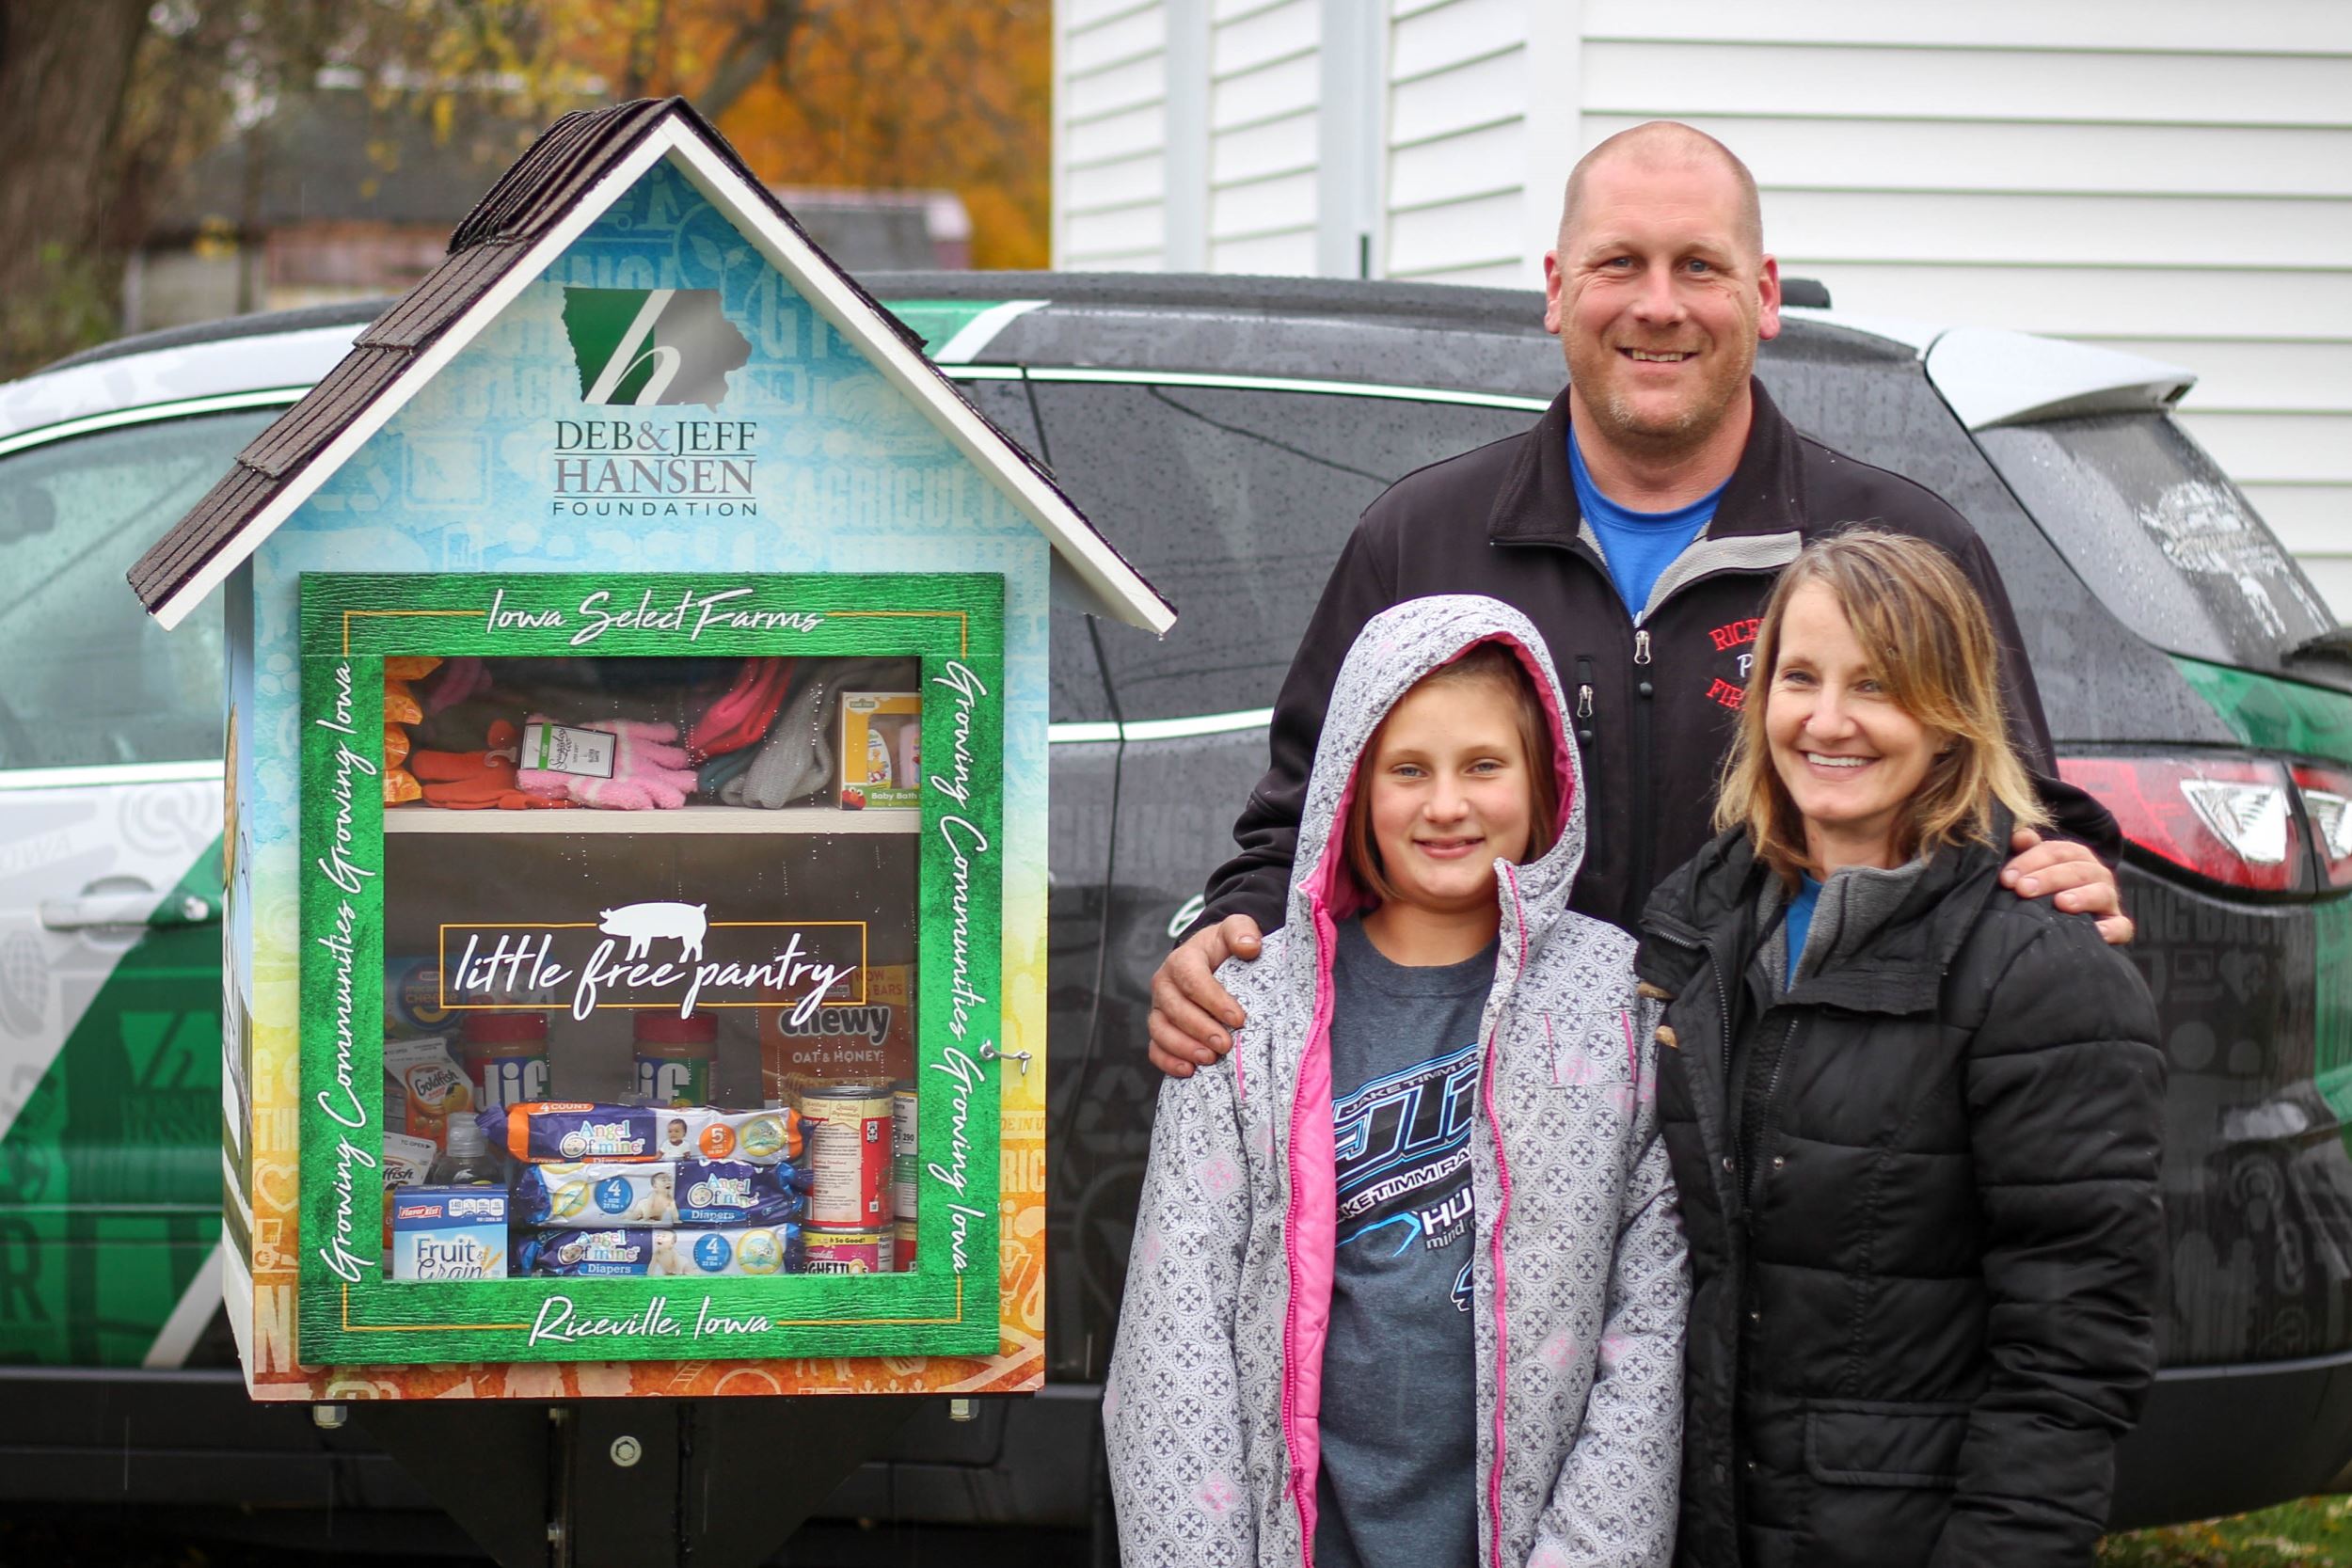 Family stands by little free pantry